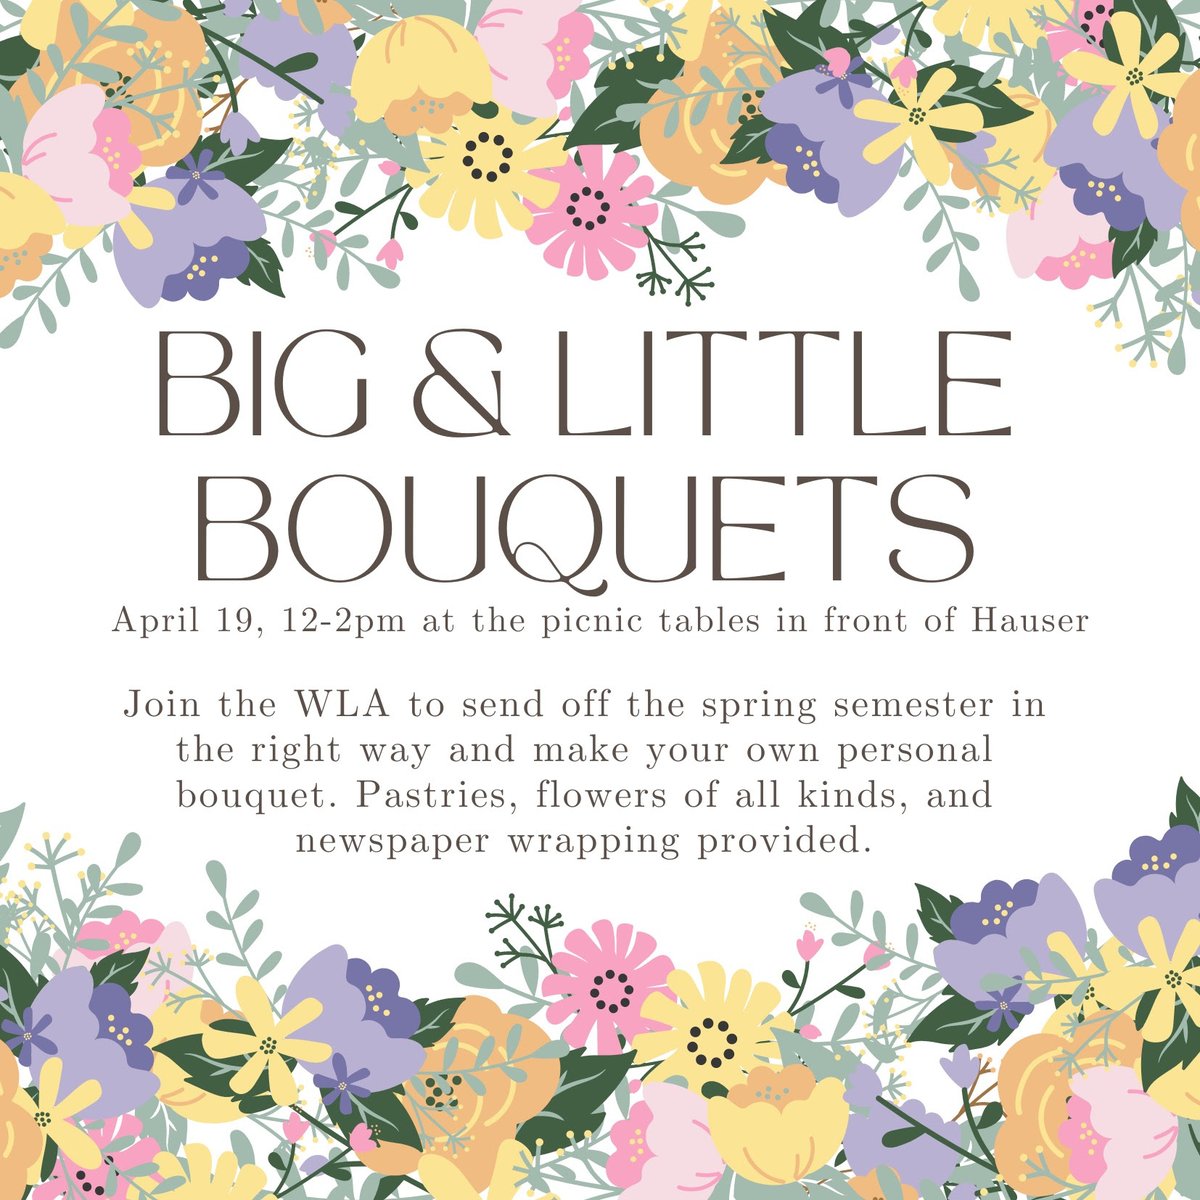 Grab your big/little sister and join the WLA in sending off the spring semester the right way by making your own personal bouquet. Pastries, flowers of all kinds, and newspaper wrapping will be provided. RSVP: bit.ly/3uMdvsO